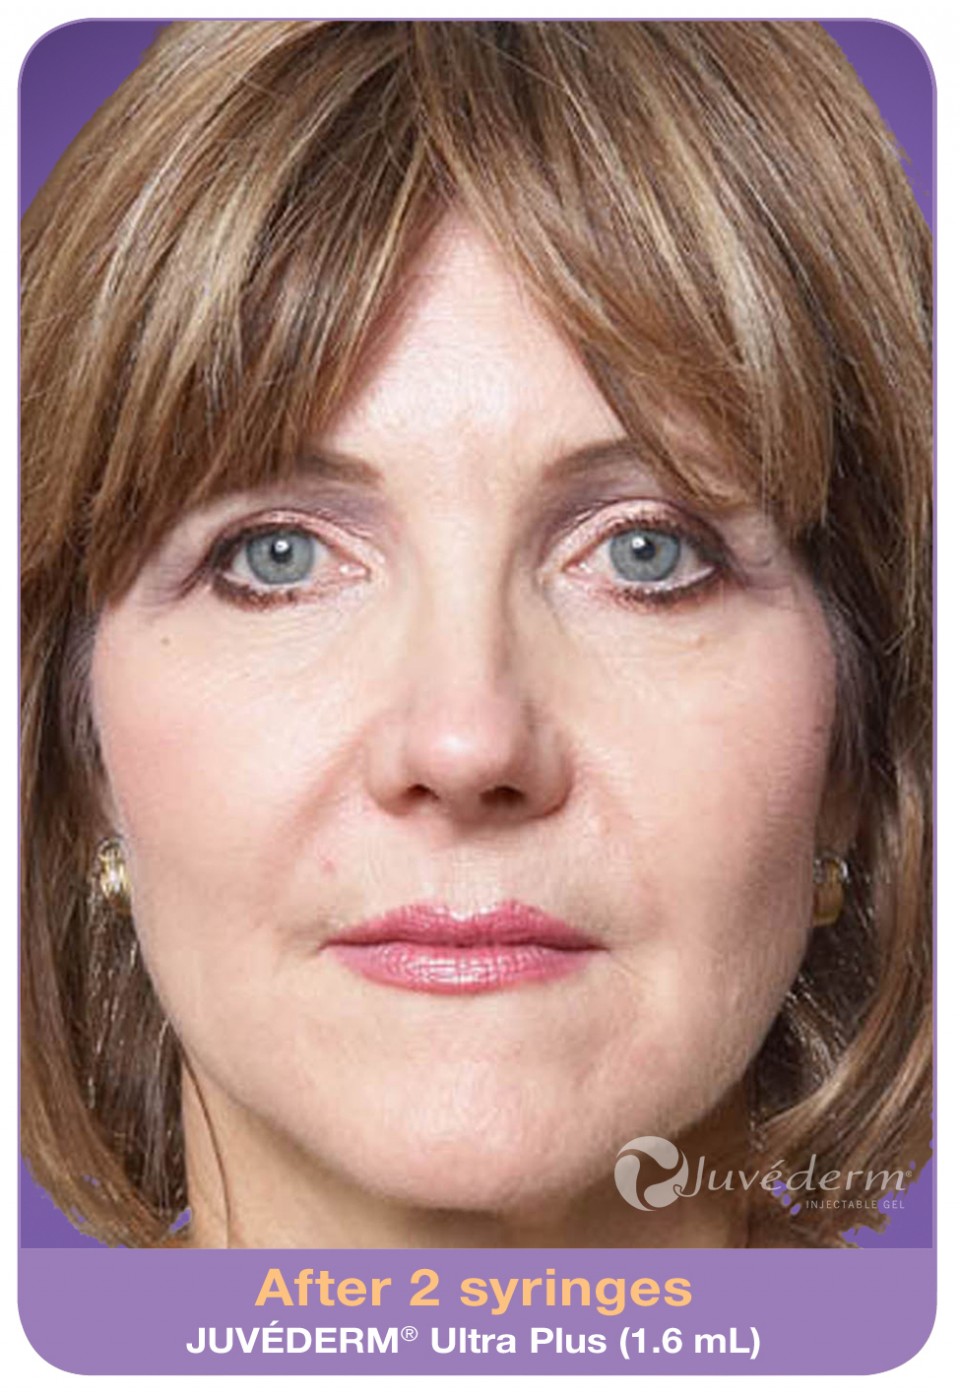 Here is SANDY ...AFTER her JUVEDERM injection treatment